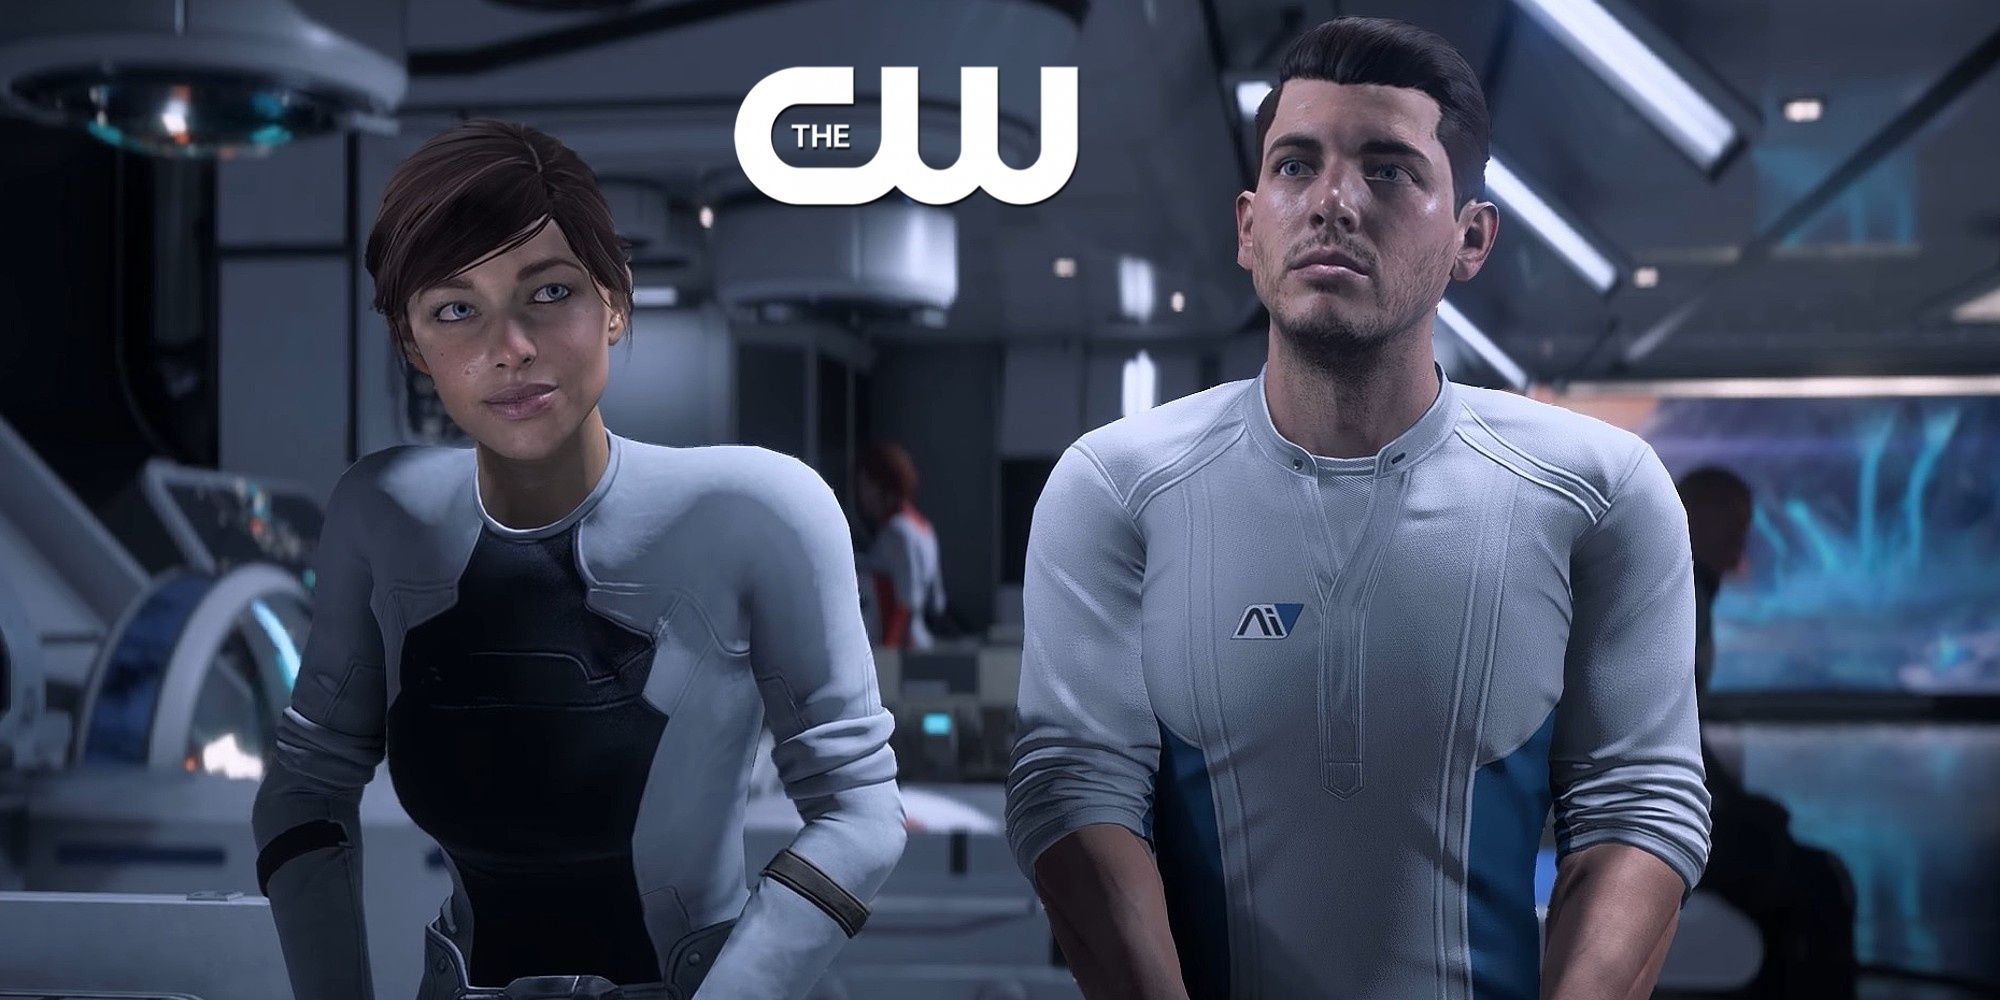 Mass Effect Andromeda Sara And Scott Ryder With The CW Logo